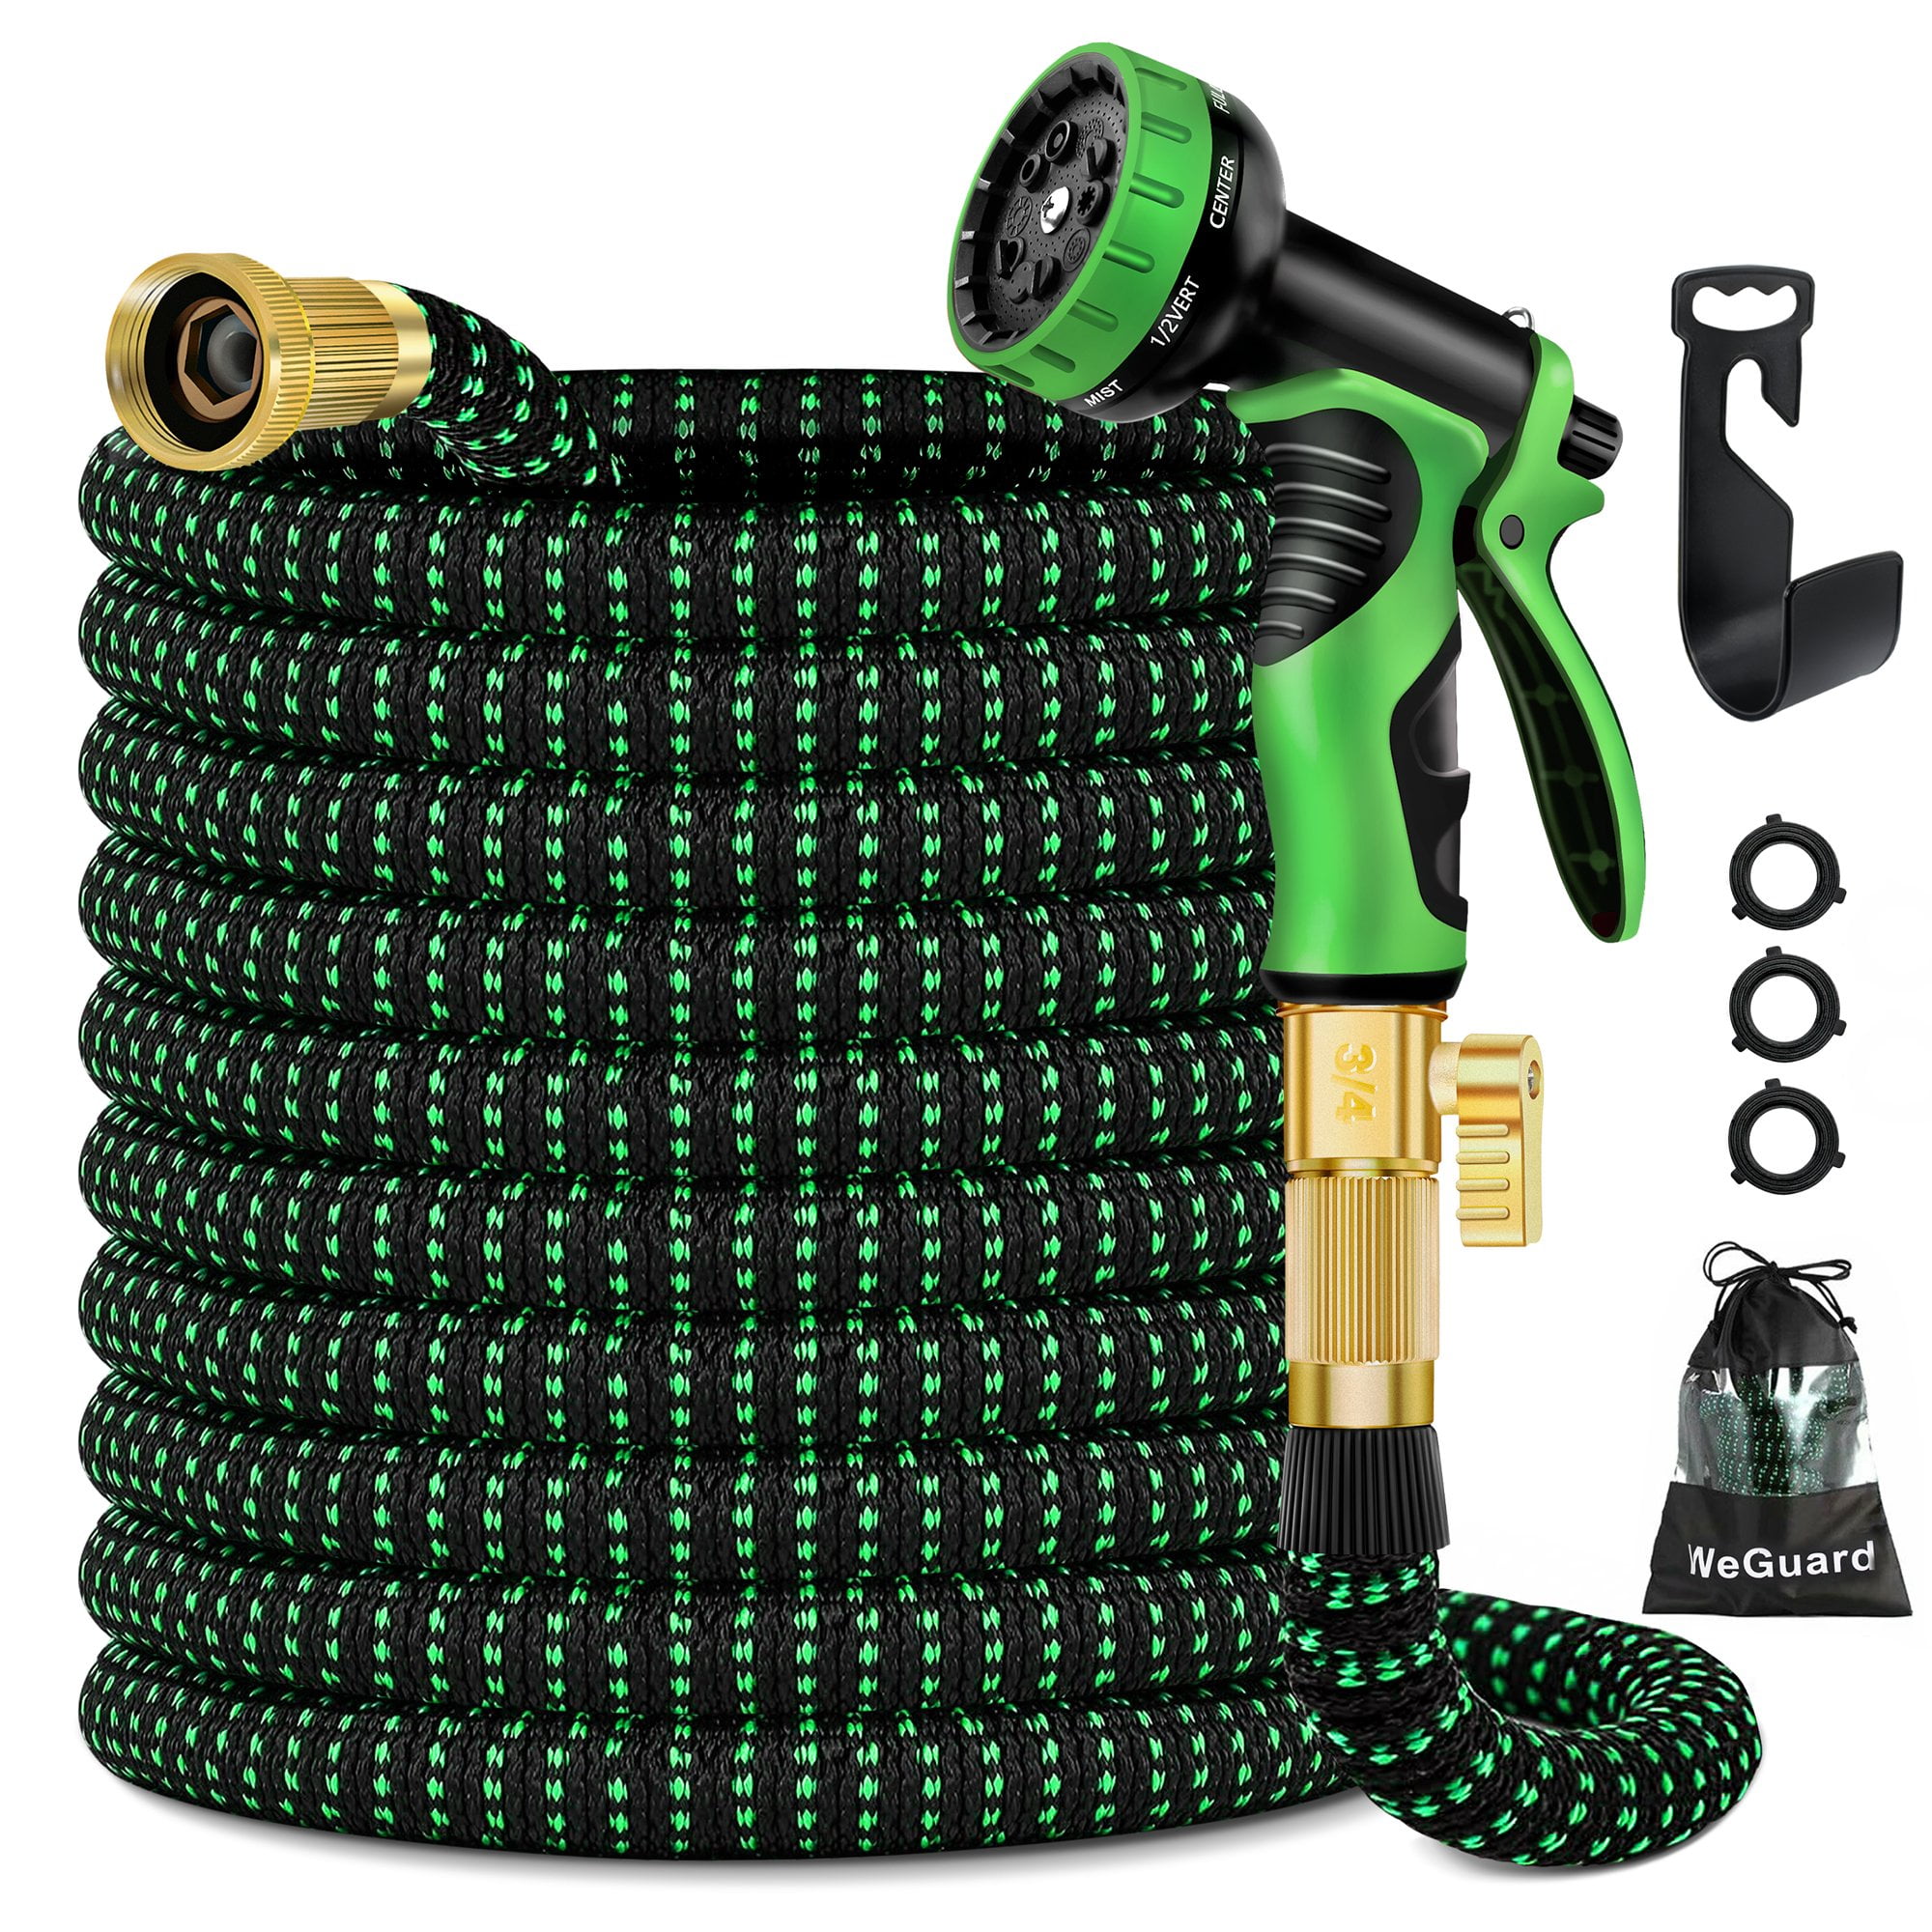 Lightweight Durable Water Hose Flexible Kink Free Hose with 3/4 Inch Solid Nickel-Plated Brass Fittings and Expanding Double Latex Core EVYNEED 100ft Expandable Garden Hose with Spray Nozzle 